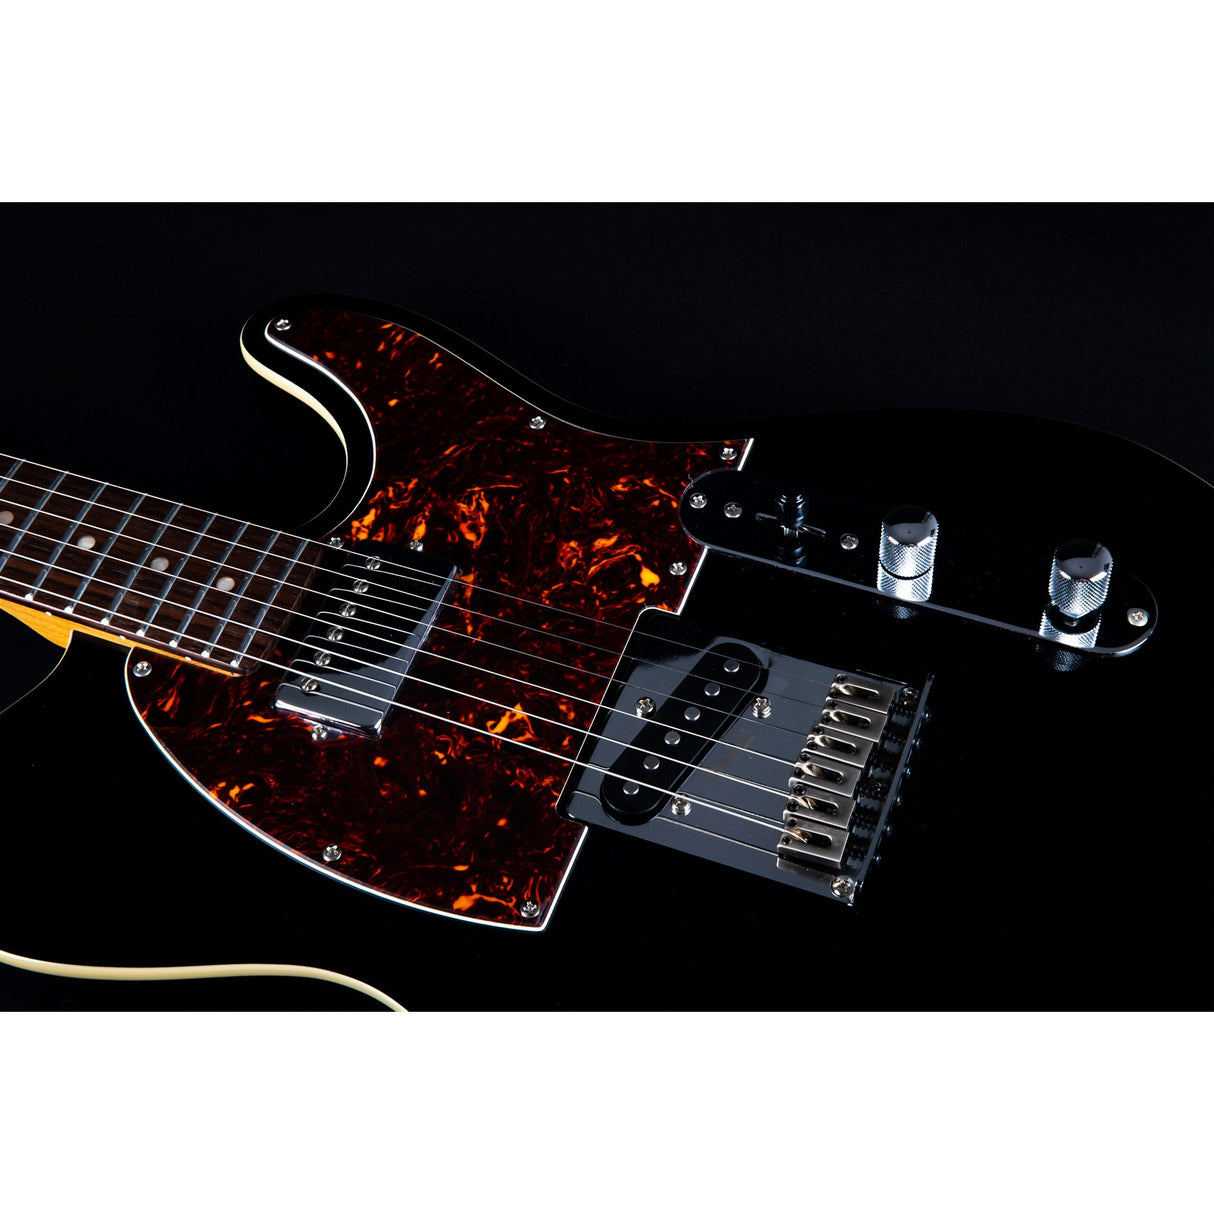 Jet Guitars JT-350 BK R SH Basswood Body Electric Guitar with Roasted Maple Neck and Rosewood Fretboard